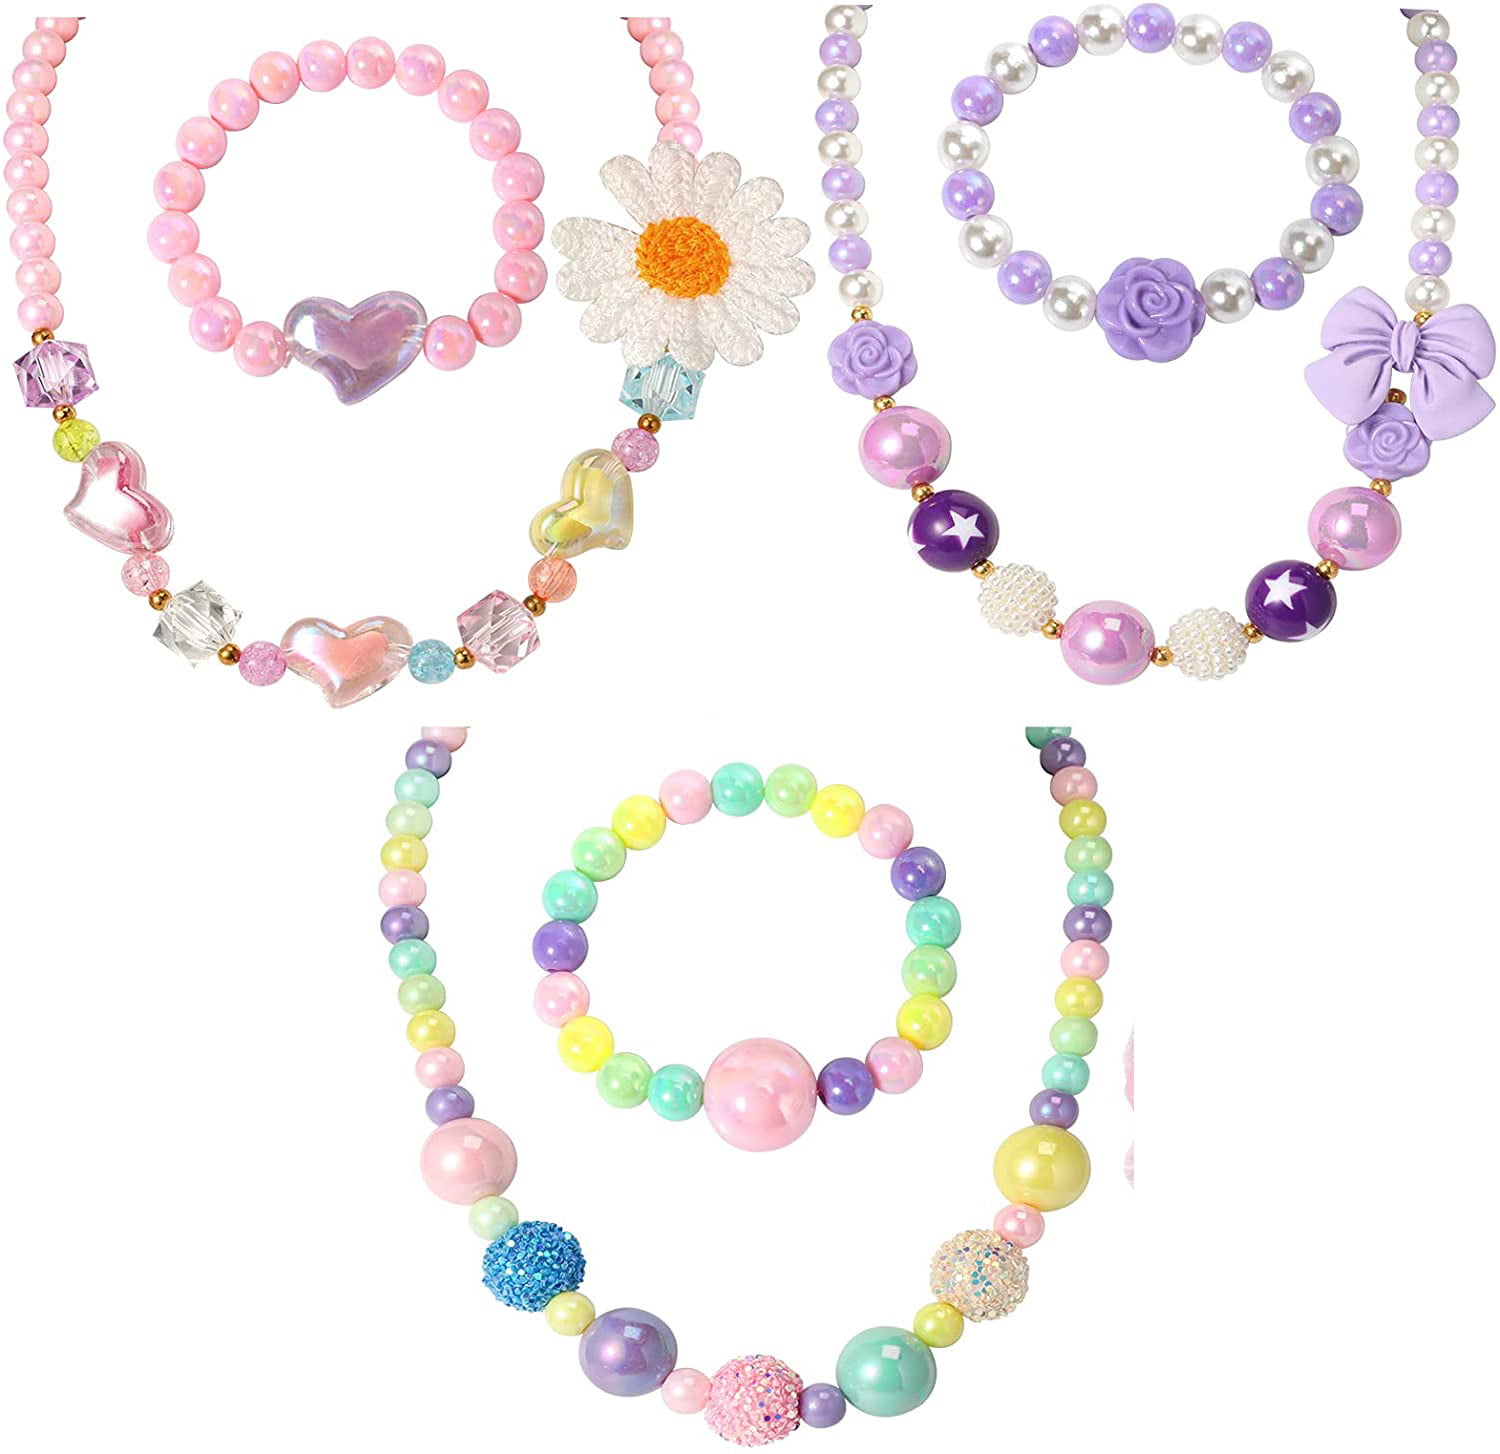 PinkSheep Kids Jewelry, 6 Sets of Beaded Necklaces and Bracelets for Girls,  Favors Bags for Toddlers (Classic)